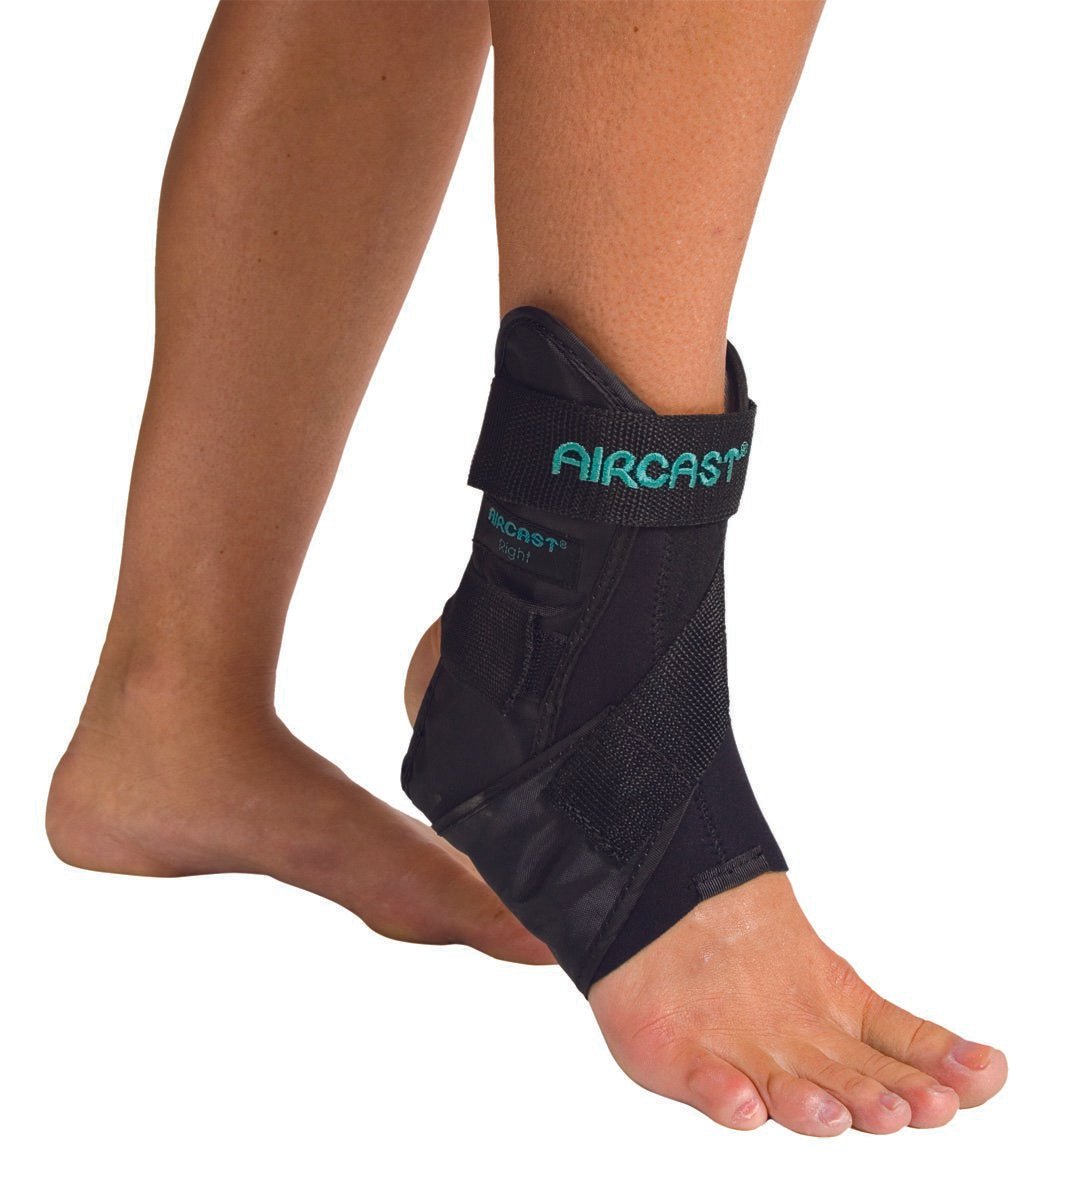 AirSport Left Ankle Support - 568997_EA - 1